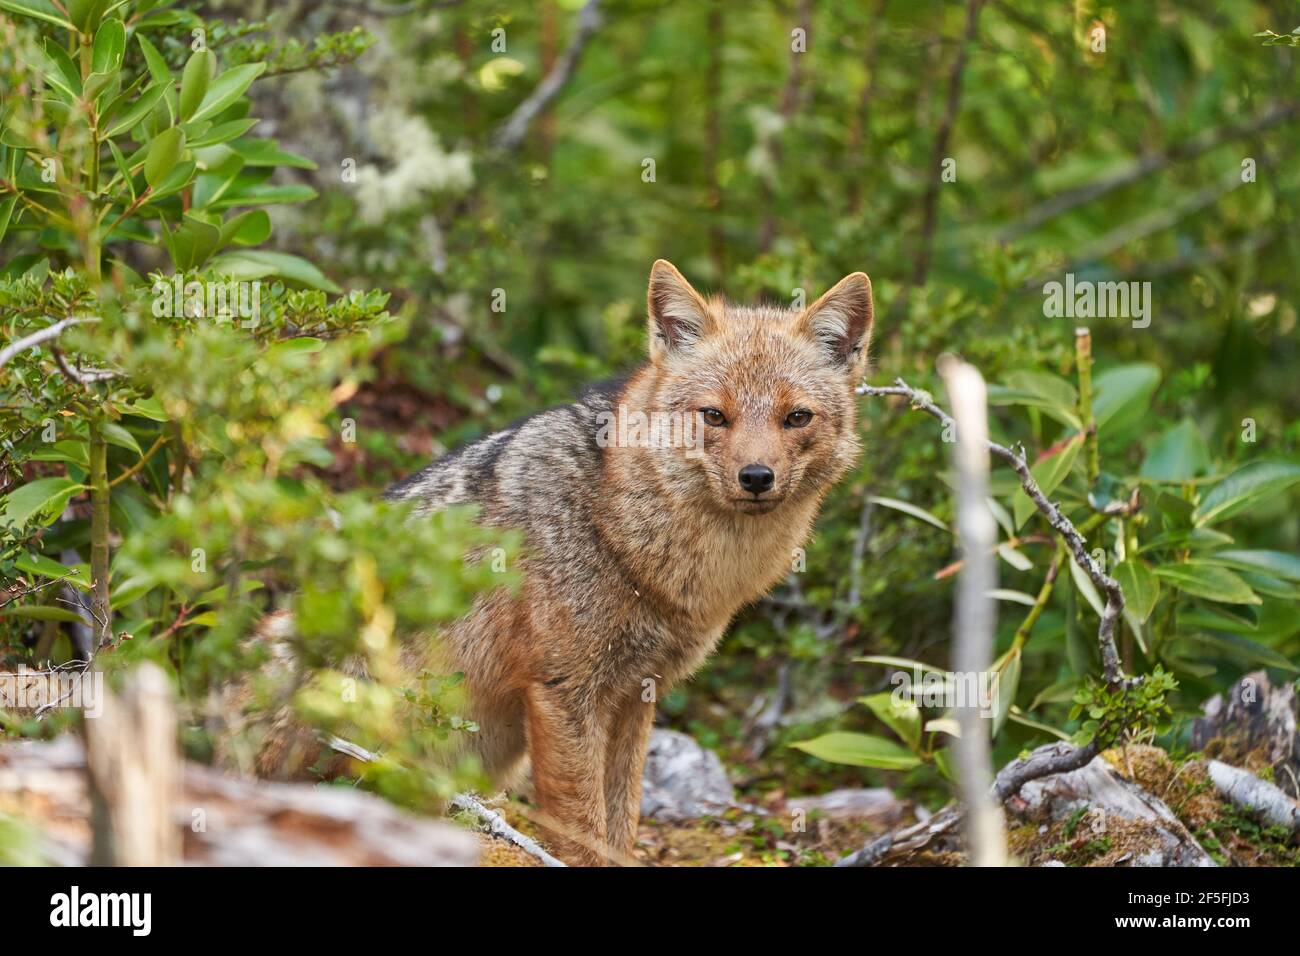 Lycalopex griseus, patagonian fox can be found on tierra del fuego, Patagonia, south america 17 Stock Photo